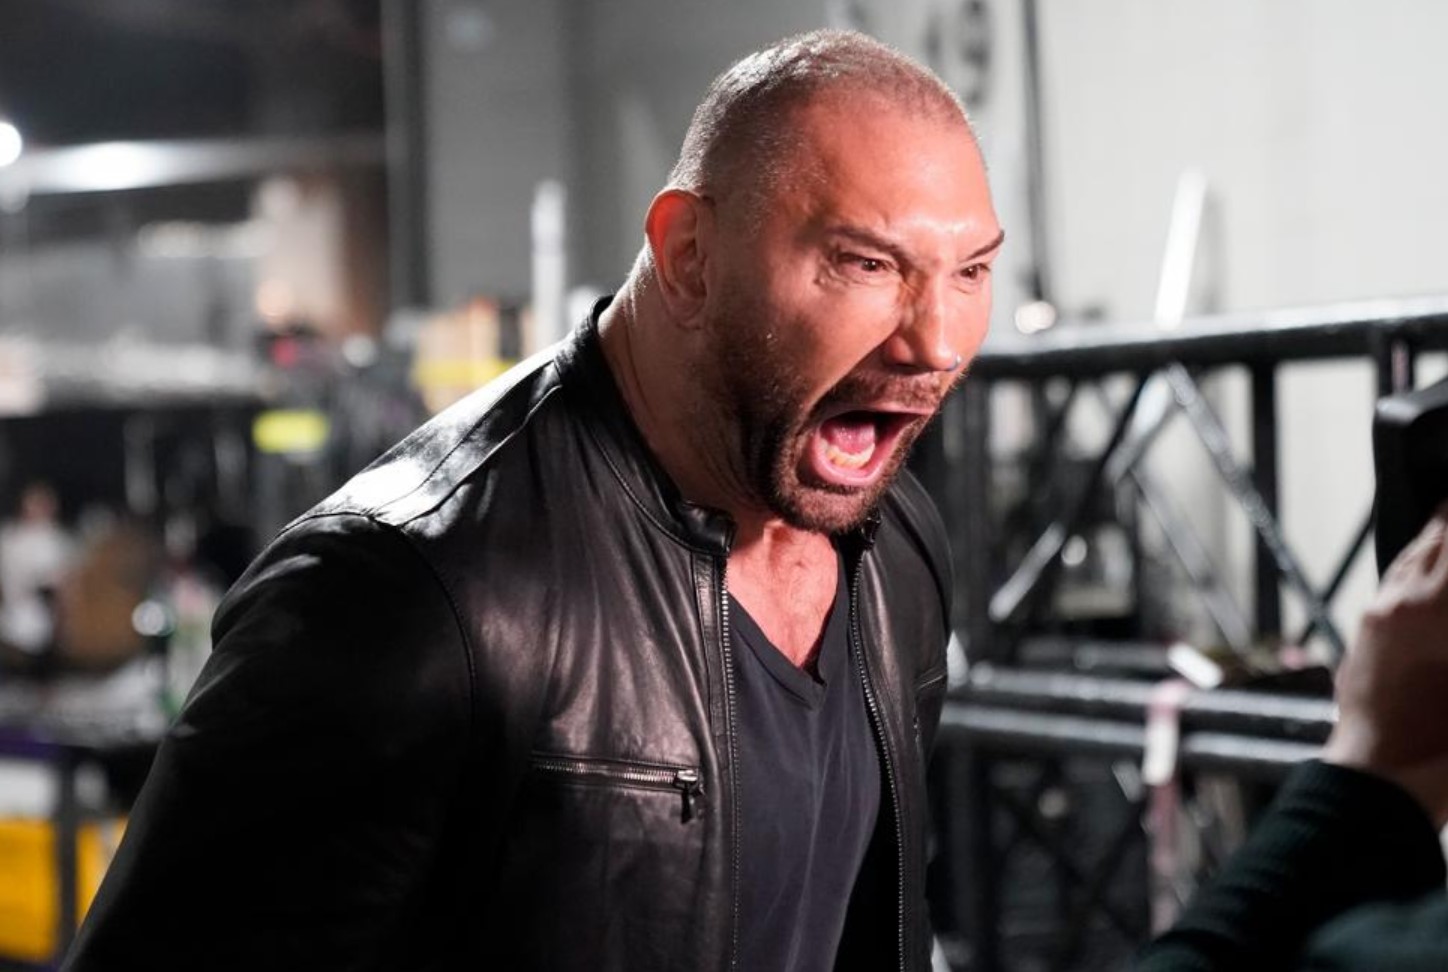 Batista returns to WWE, challenges Triple H and ruins Ric Flair's birthday